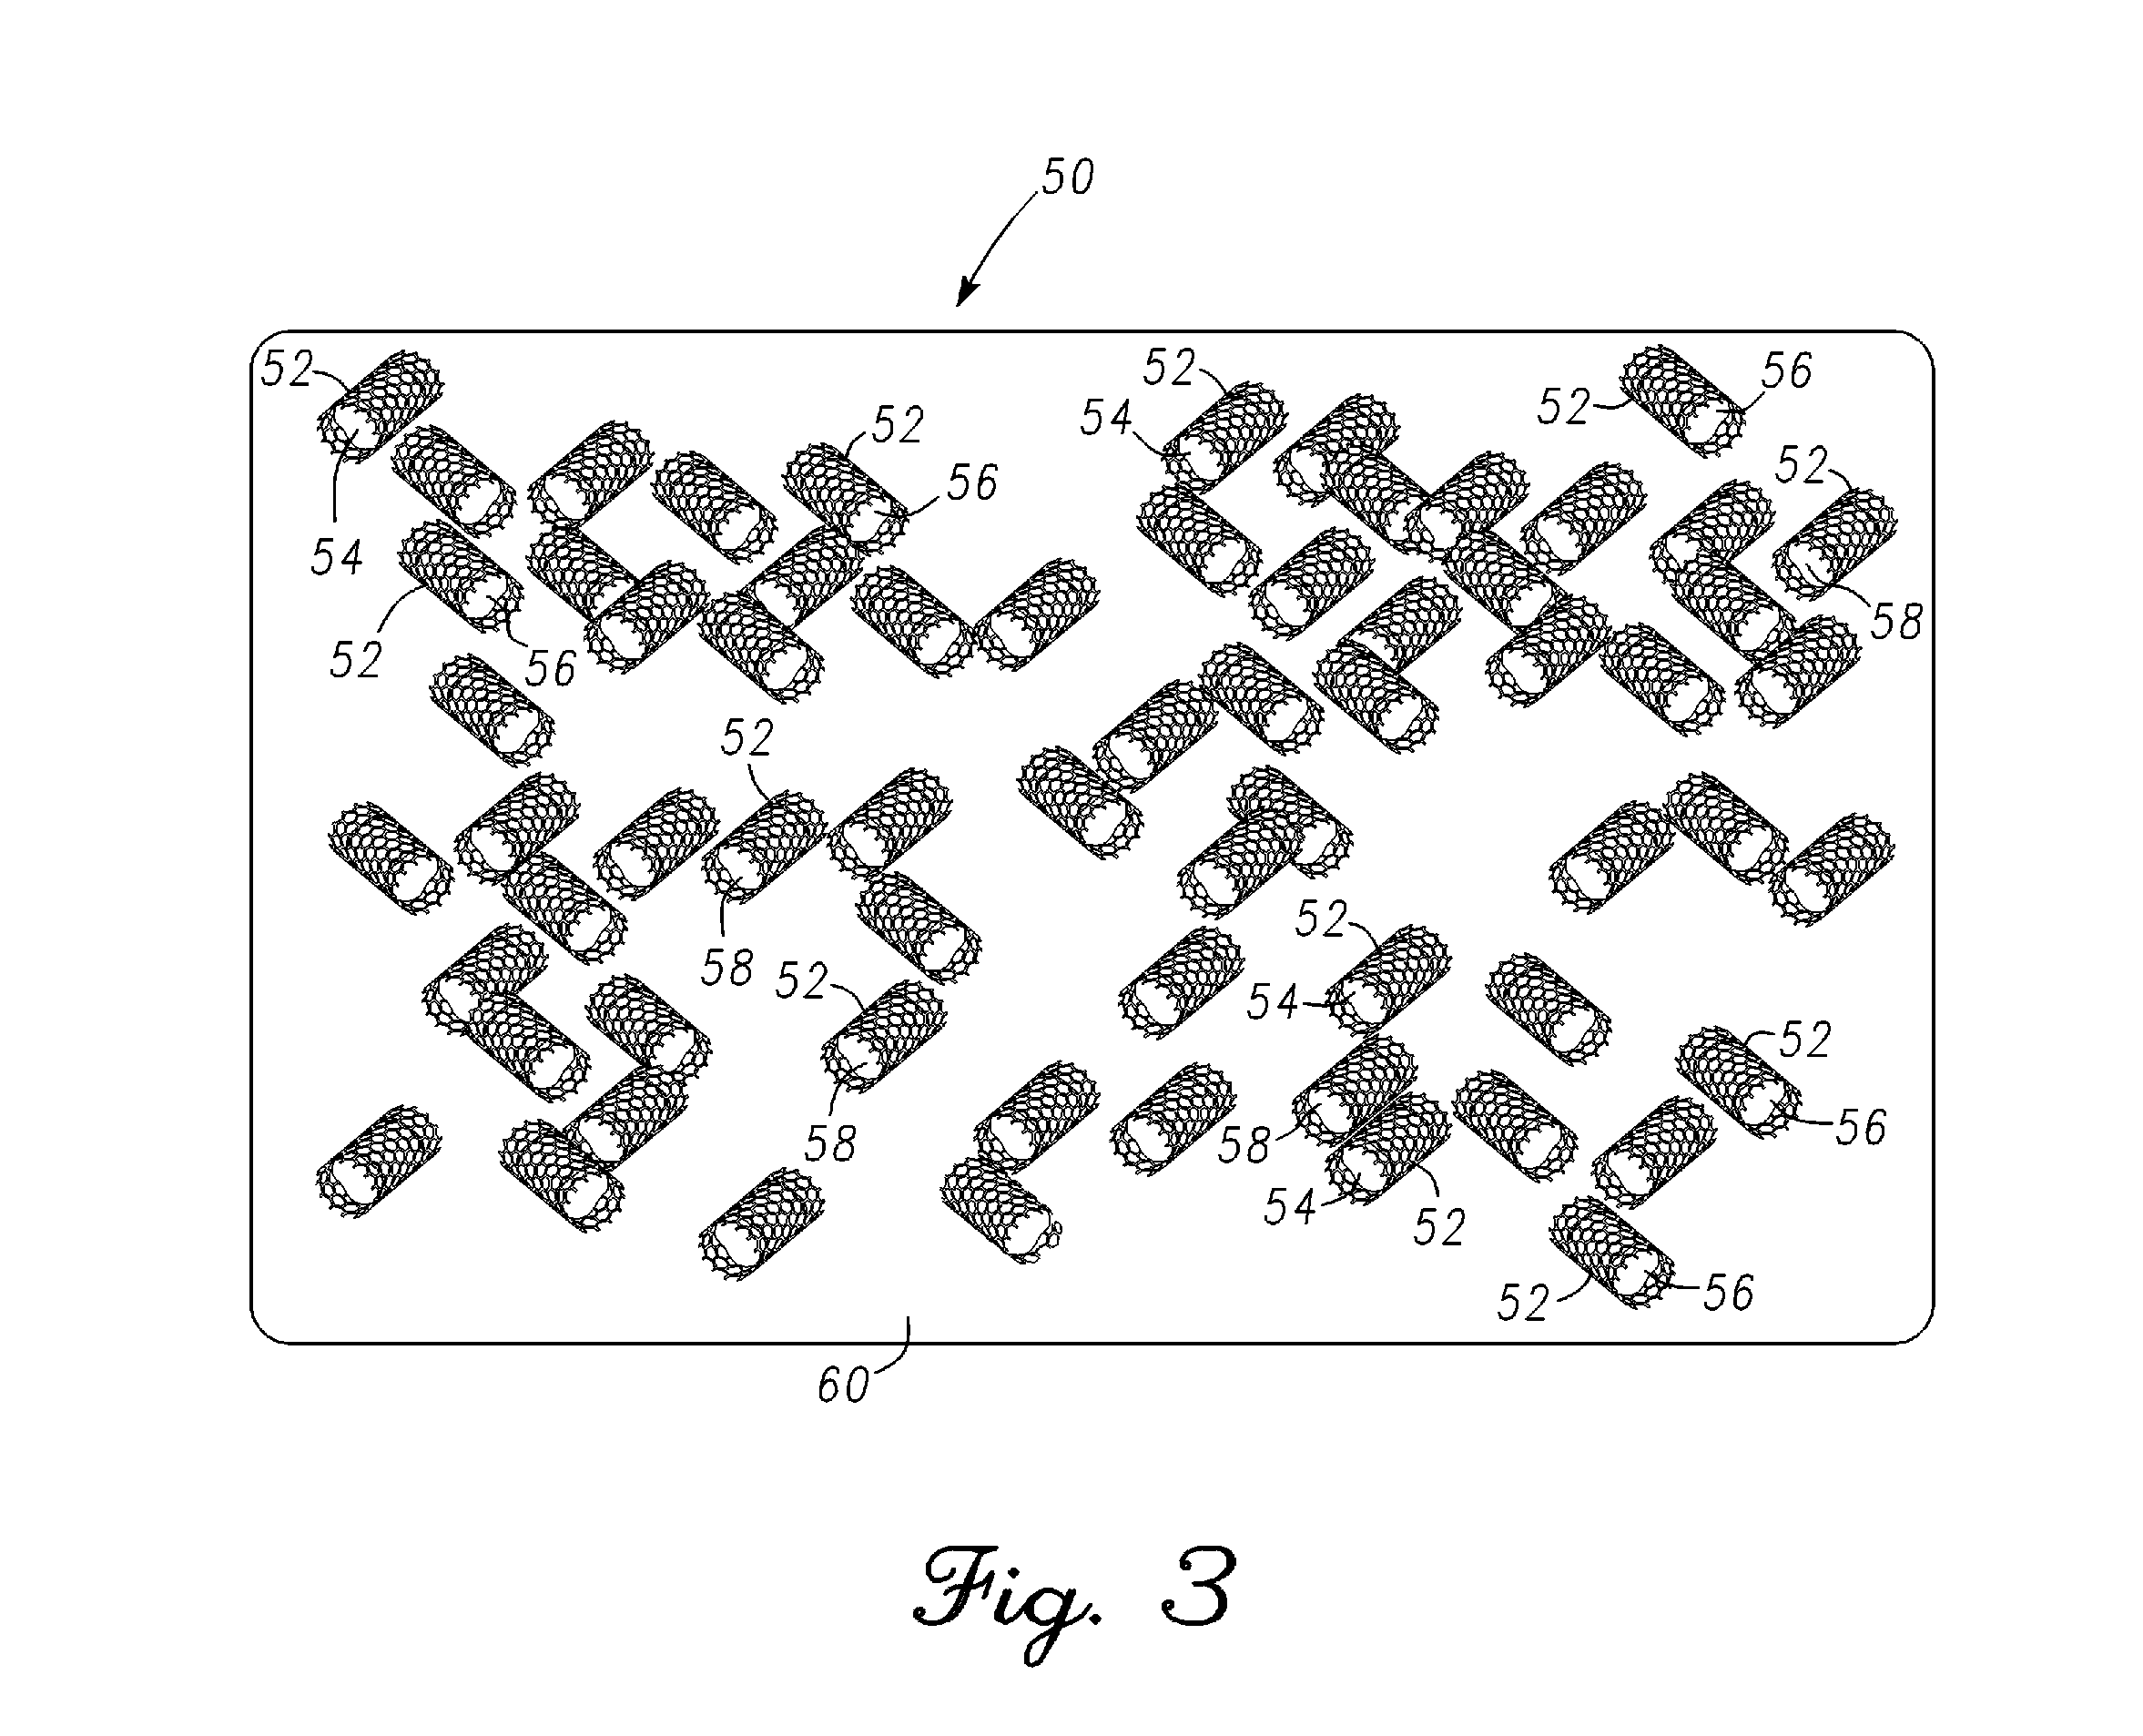 Explosive compositions and methods for fabricating explosive compositions